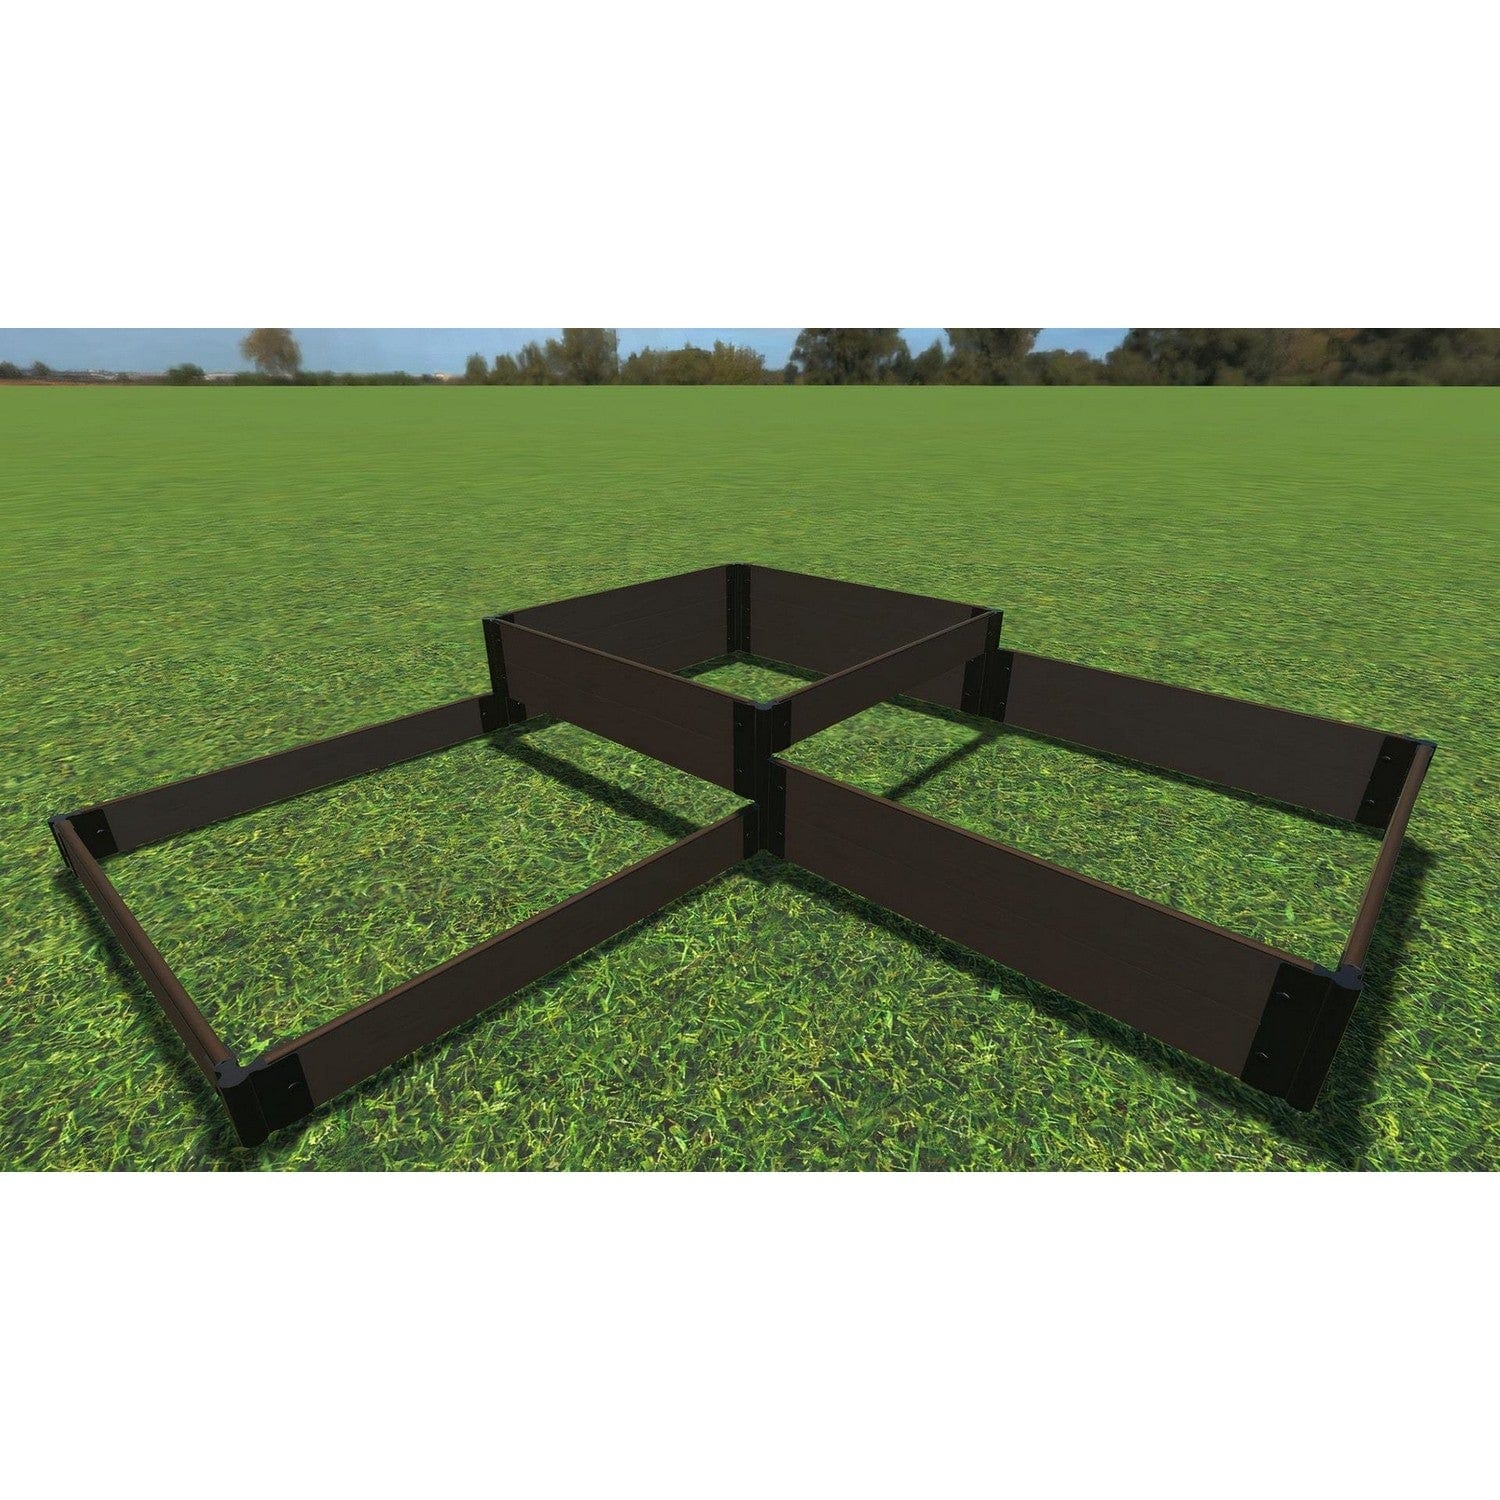 Frame It All Gardening Accessories Frame It All | Tool-Free Fort Knox Straight Corner Raised Garden Bed (Tri-Level) 8' X 8' X 16.5" - Uptown Brown - 1" Profile 800001023